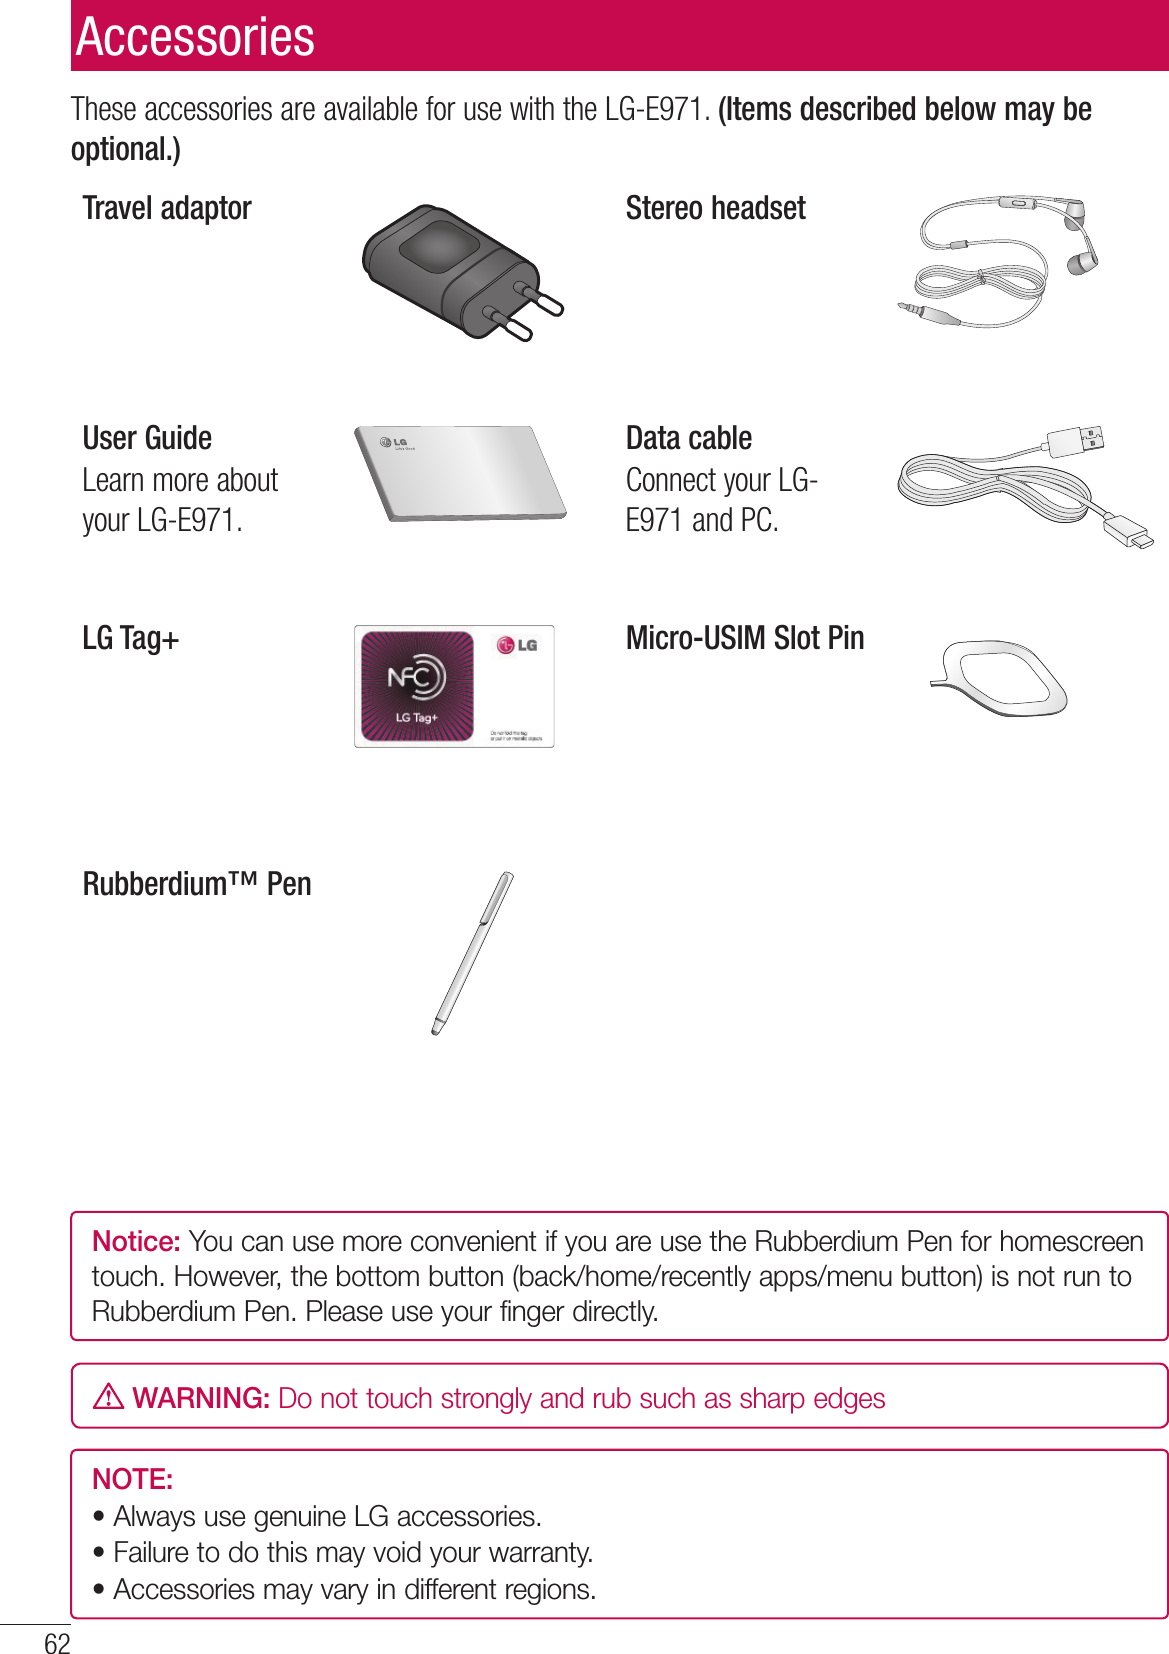 62These accessories are available for use with the LG-E971. (Items described below may be optional.)Travel adaptor Stereo headsetUser GuideLearn more about your LG-E971.Data cableConnect your LG-E971 and PC.LG Tag+ Micro-USIM Slot PinRubberdium™ PenNOTE: •  Always use genuine LG accessories. •  Failure to do this may void your warranty.•  Accessories may vary in different regions.AccessoriesNotice: You can use more convenient if you are use the Rubberdium Pen for homescreen touch. However, the bottom button (back/home/recently apps/menu button) is not run to Rubberdium Pen. Please use your finger directly. WARNING: Do not touch strongly and rub such as sharp edges